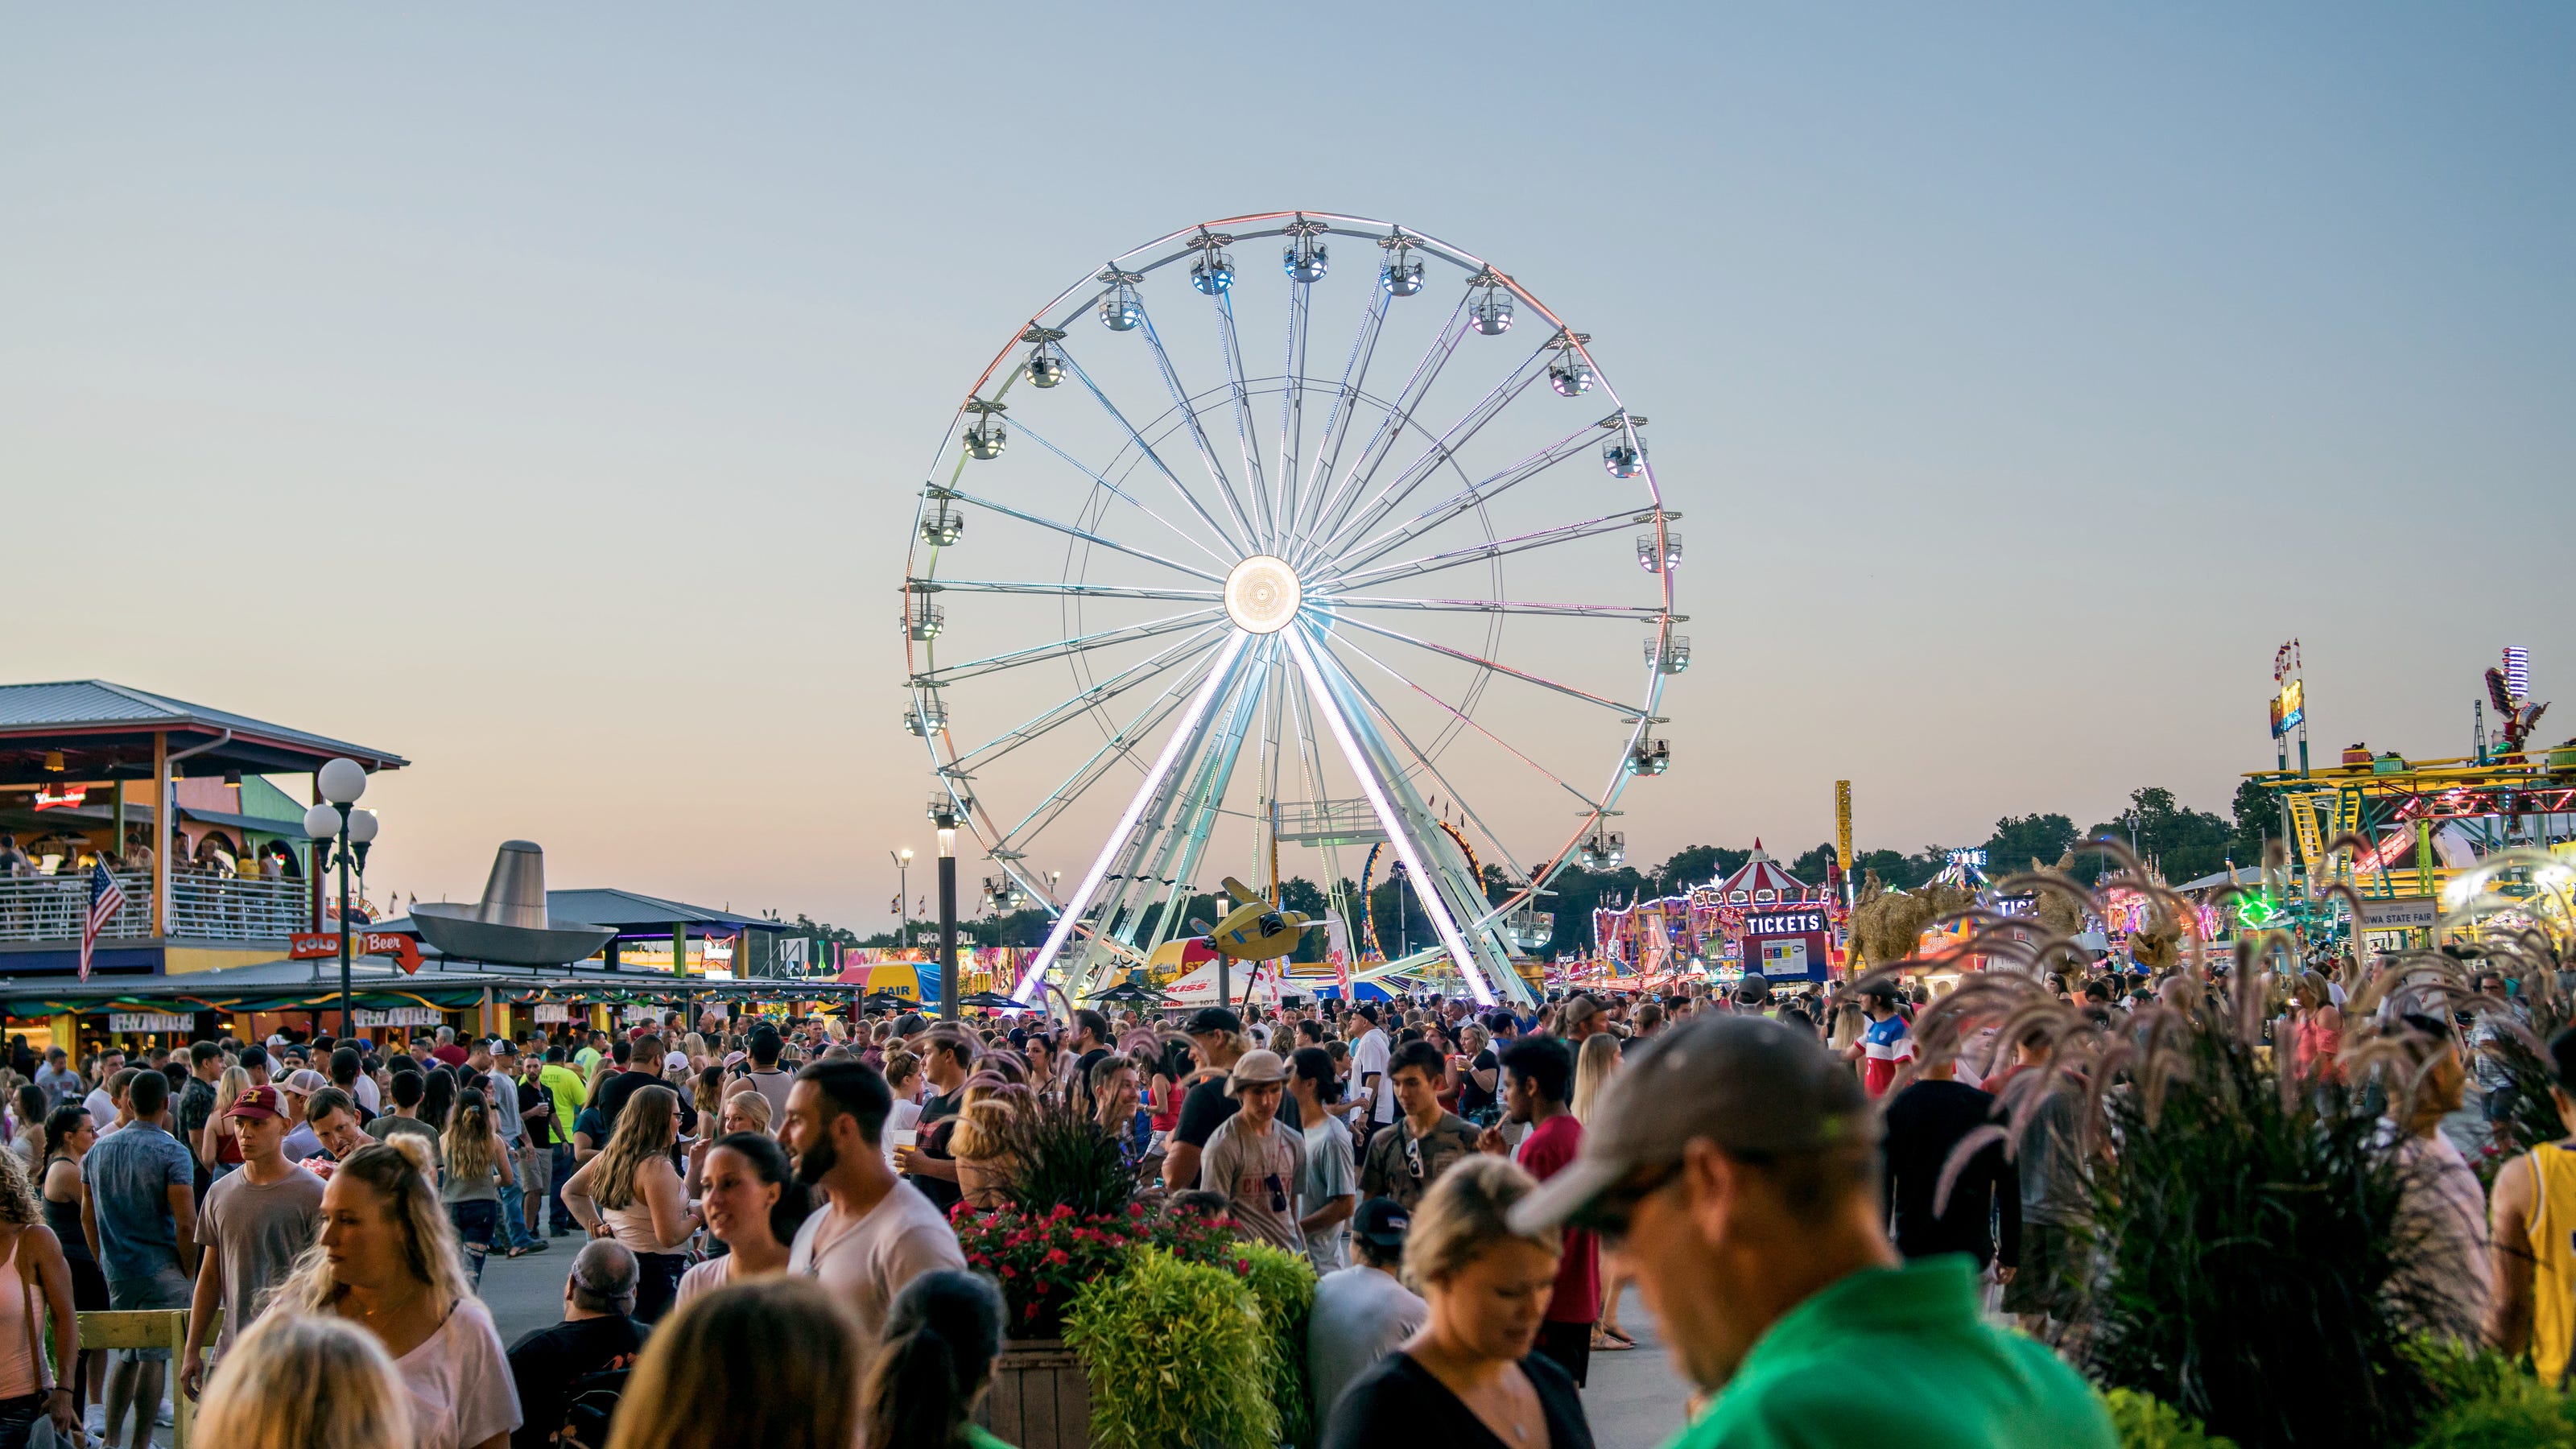 Iowa State Fair 2019 7 things to do and see at the fair